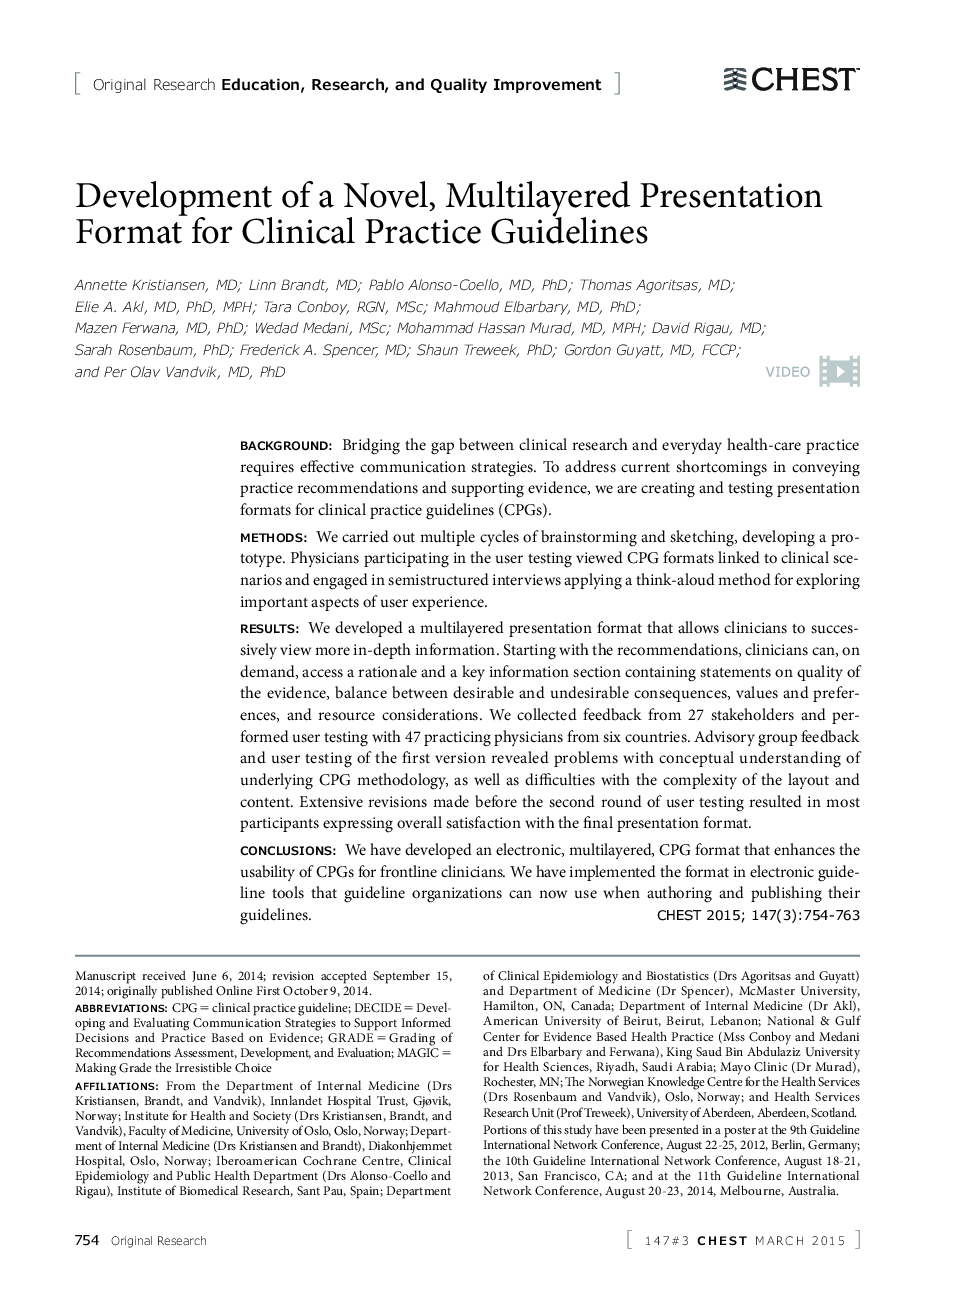 Development of a Novel, Multilayered Presentation Format for Clinical Practice Guidelines 